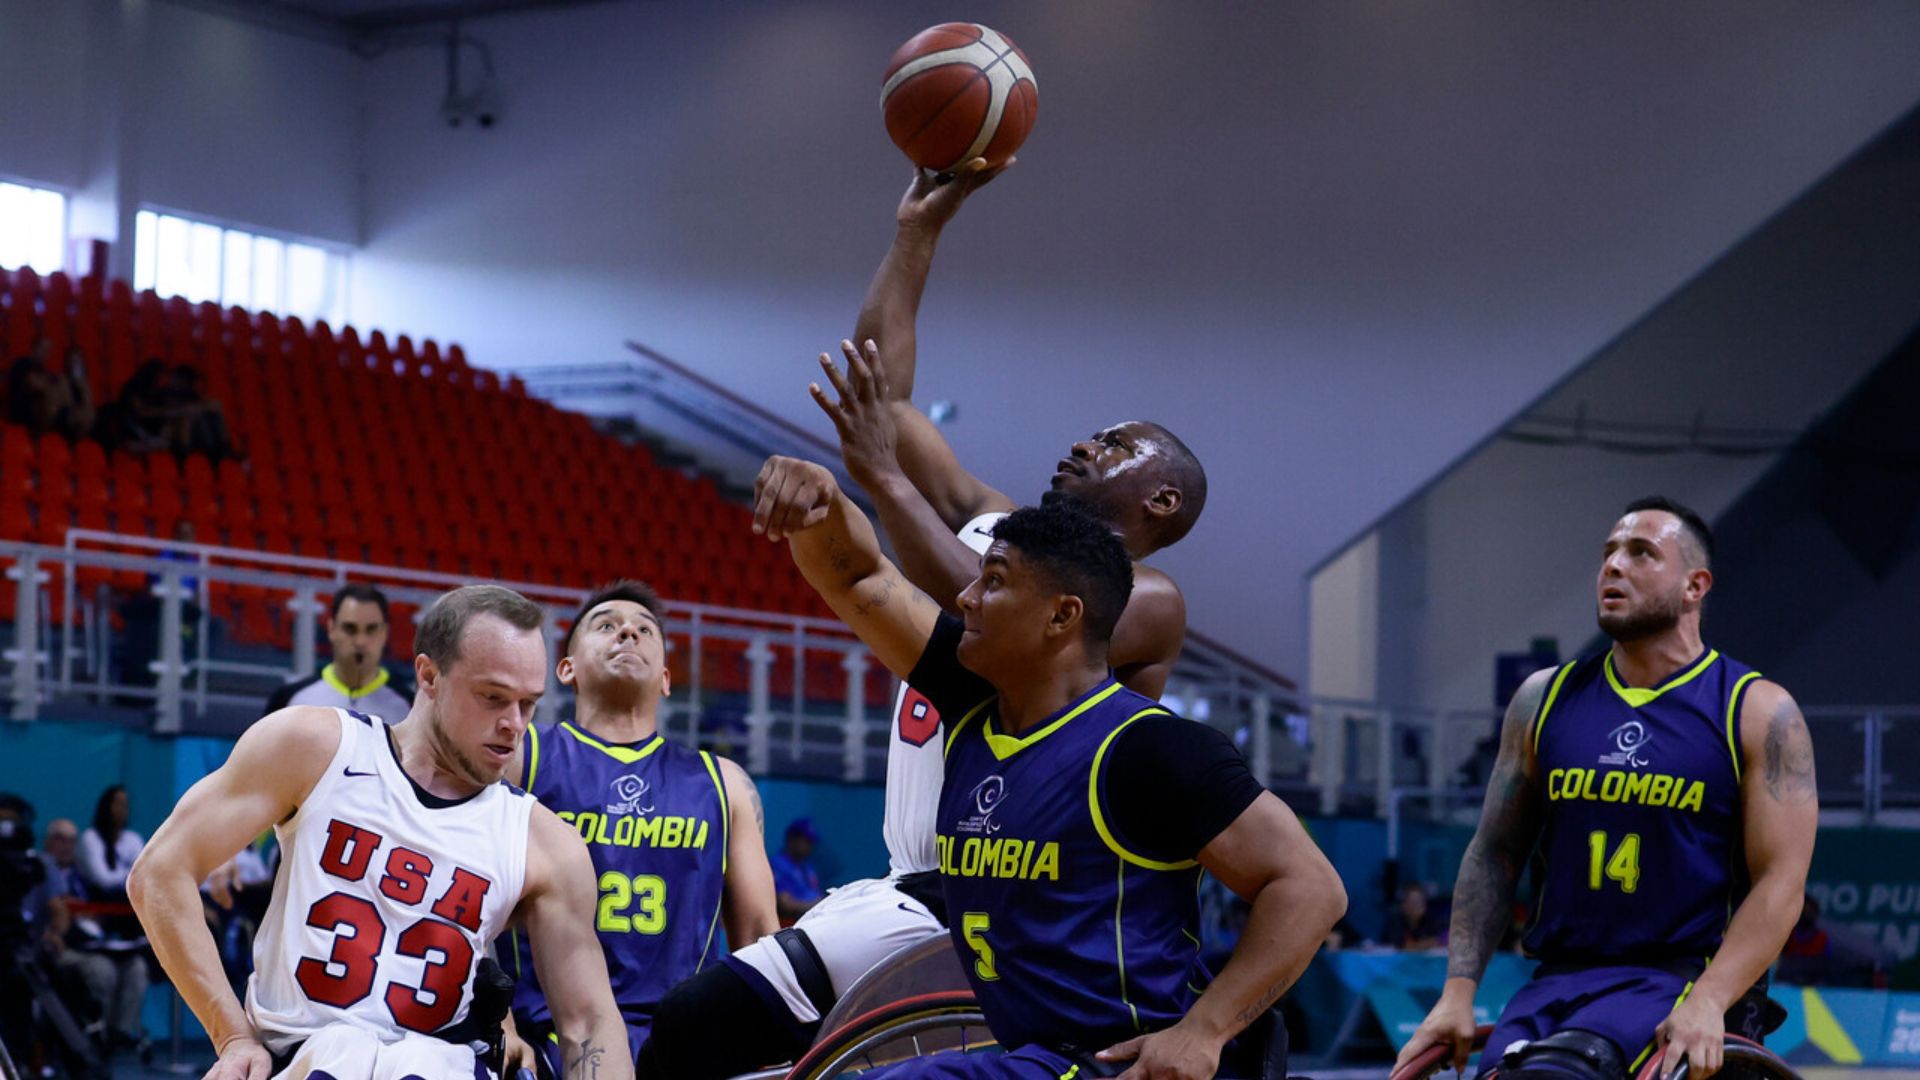 Wheelchair Basketball: U.S. Beats Colombia in Duel of Unbeatens